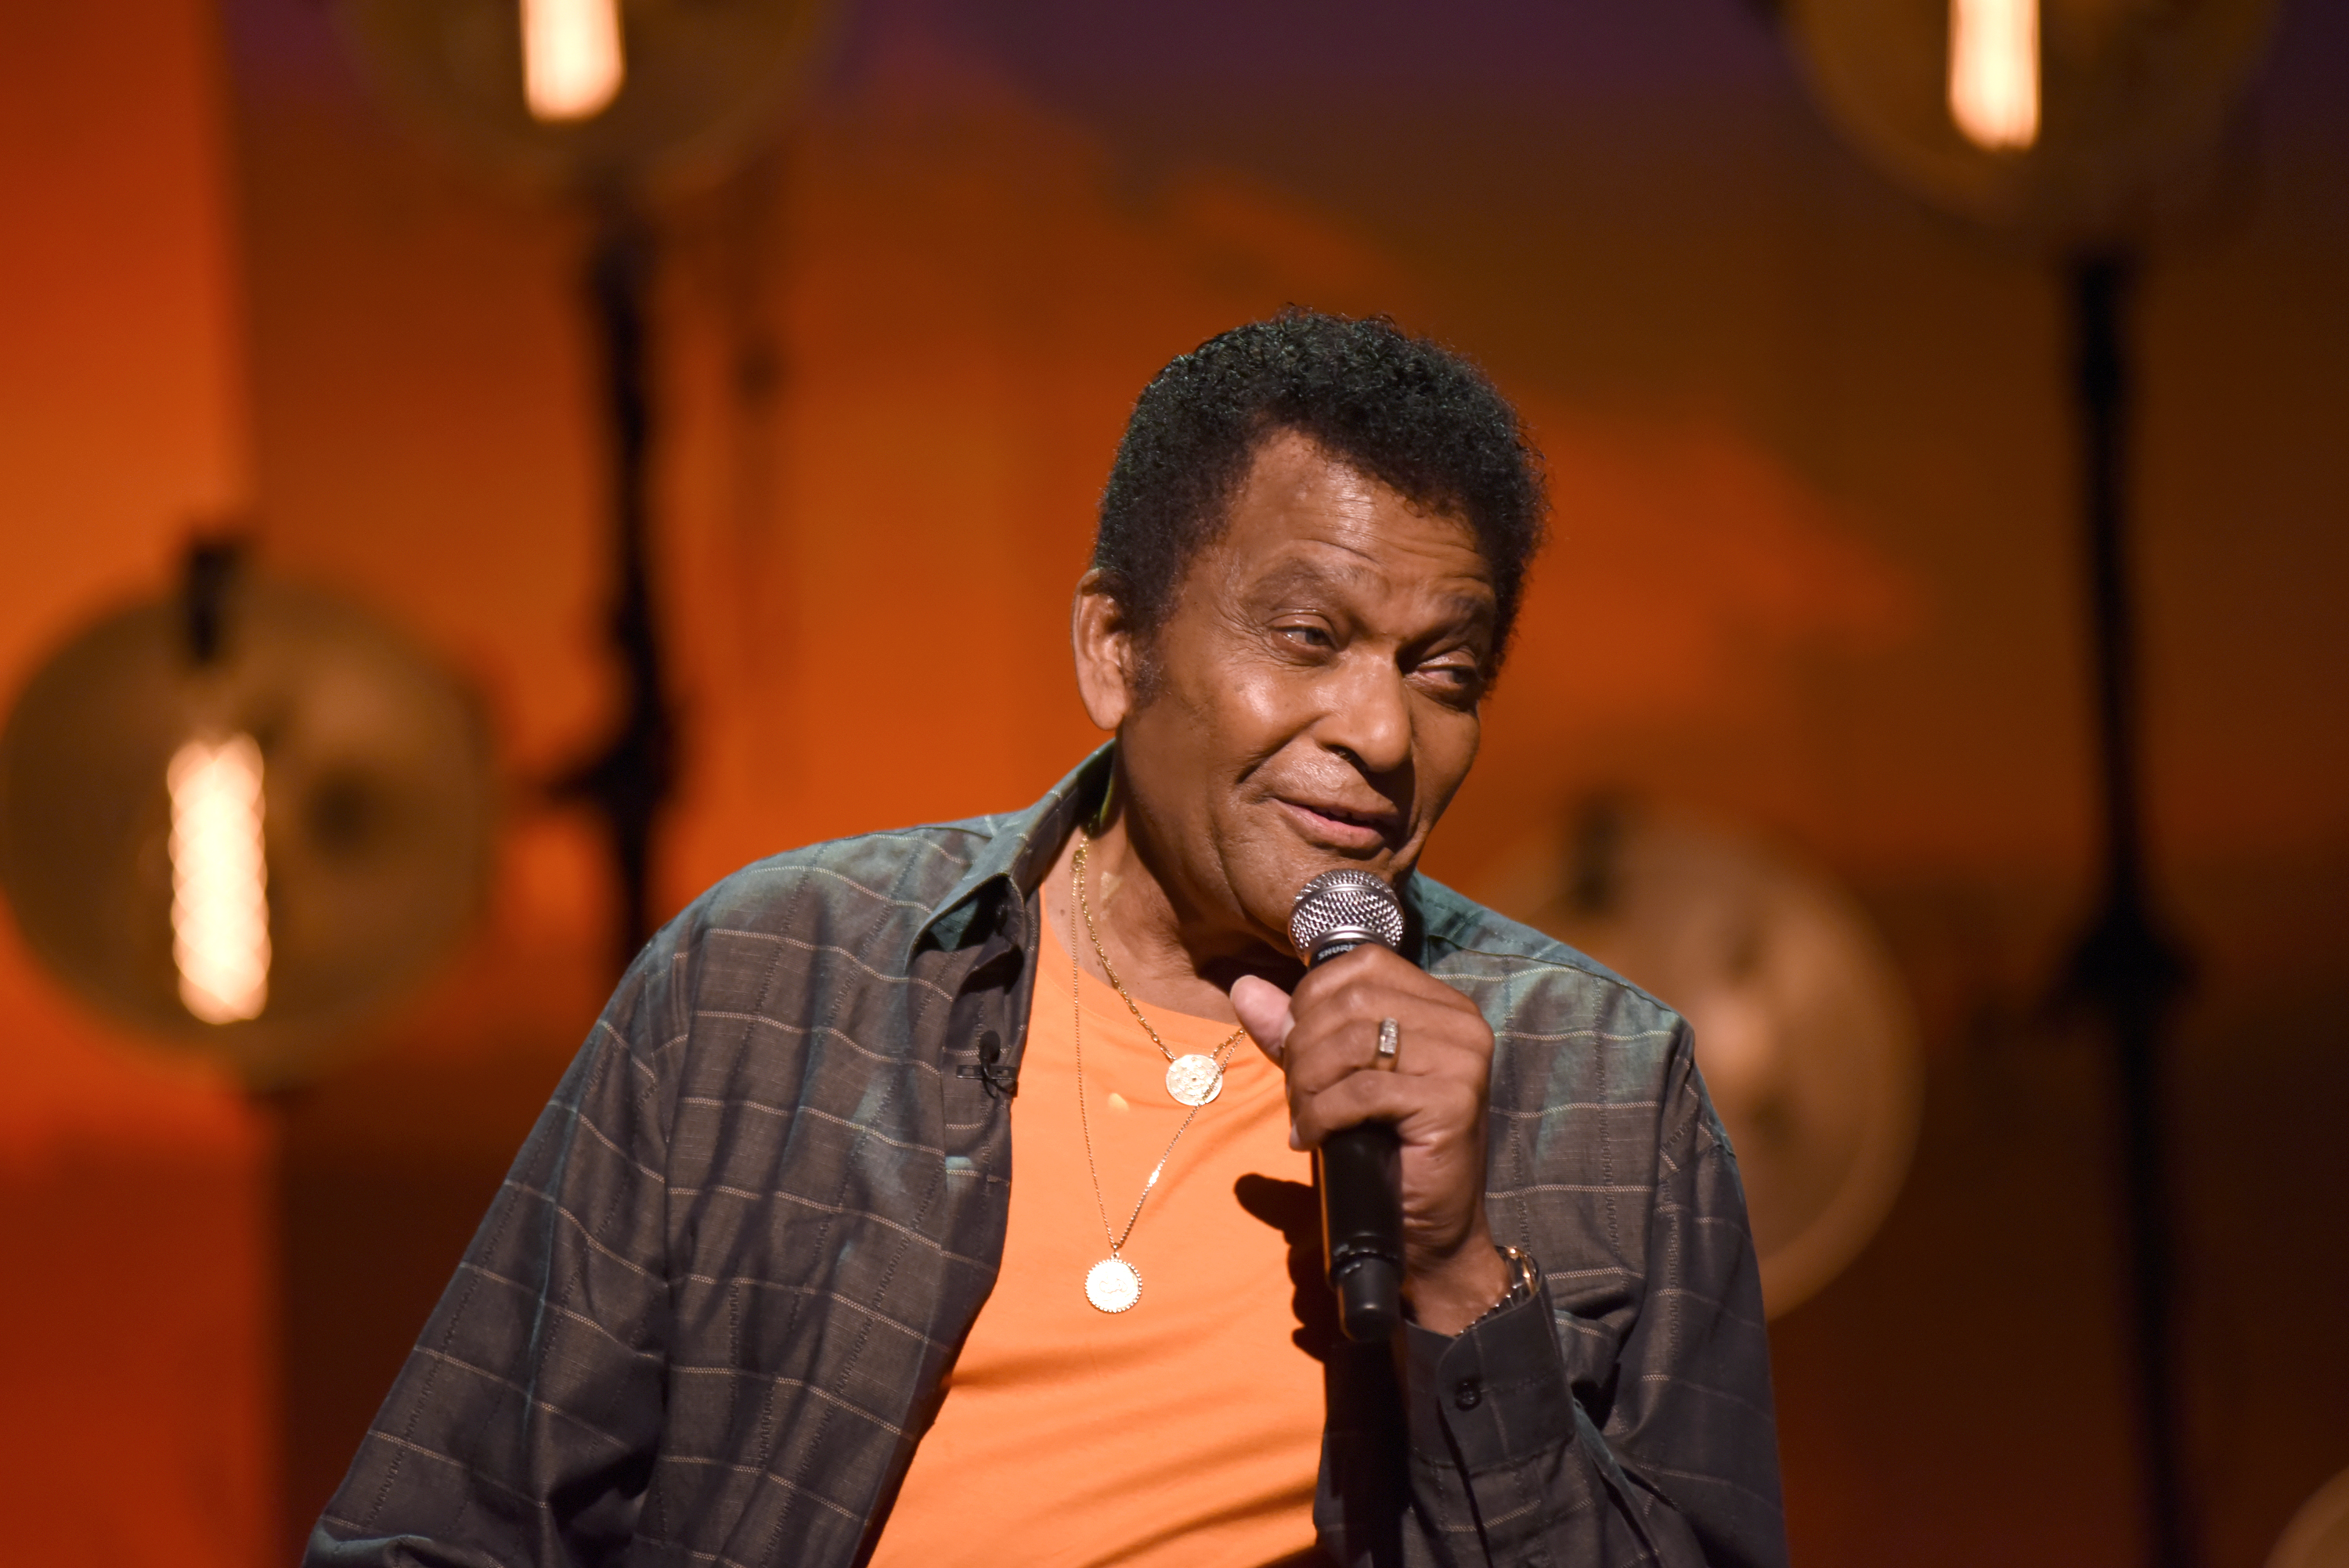 <p>Country music legend Charley Pride -- a pioneer for Black artists in the genre and the first Black member of the Country Music Hall of Fame -- died on Dec. 12 in Dallas from complications of COVID-19. He was 86. The Grammy winner, who was known for hit songs like "Kiss an Angel Good Morning" and "Is Anybody Goin' to San Antone," delivered his final performance at November's <a href="https://www.wonderwall.com/awards-events/best-photos-from-the-2020-cma-awards-400840.gallery">2020 Country Music Association Awards</a>, where he was given a lifetime achievement award. </p>